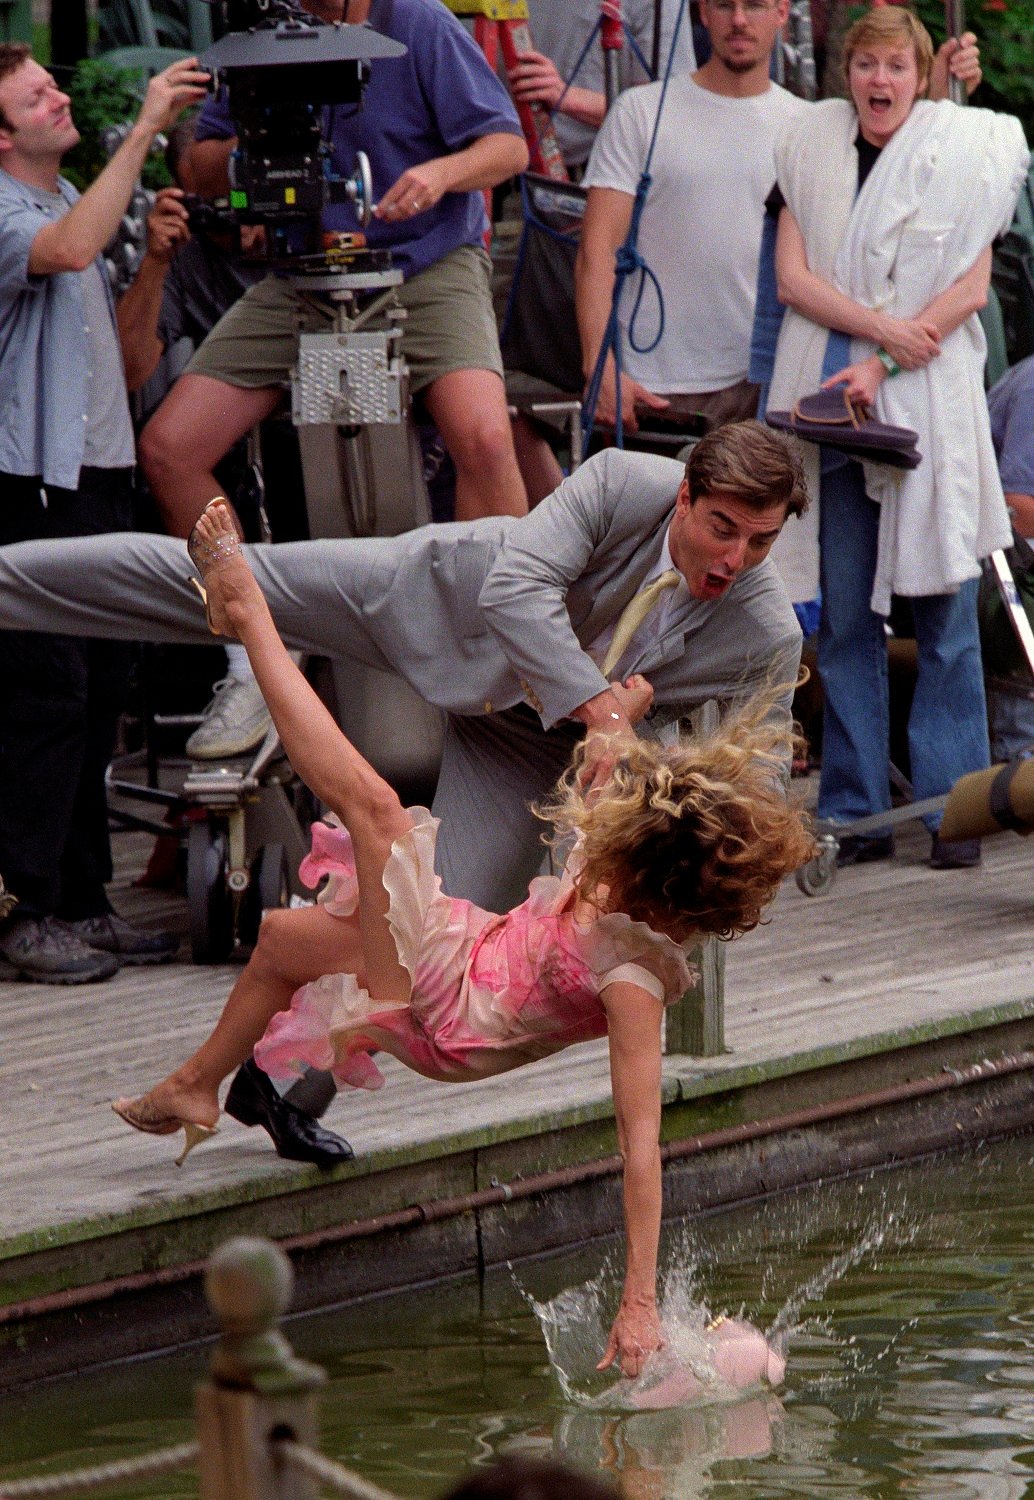 Sarah Jessica Parker as Carrie Bradshaw and Chris Noth as Mr. Big fall into Central Park Lake while filming a season 3 scene for 'Sex and the City'